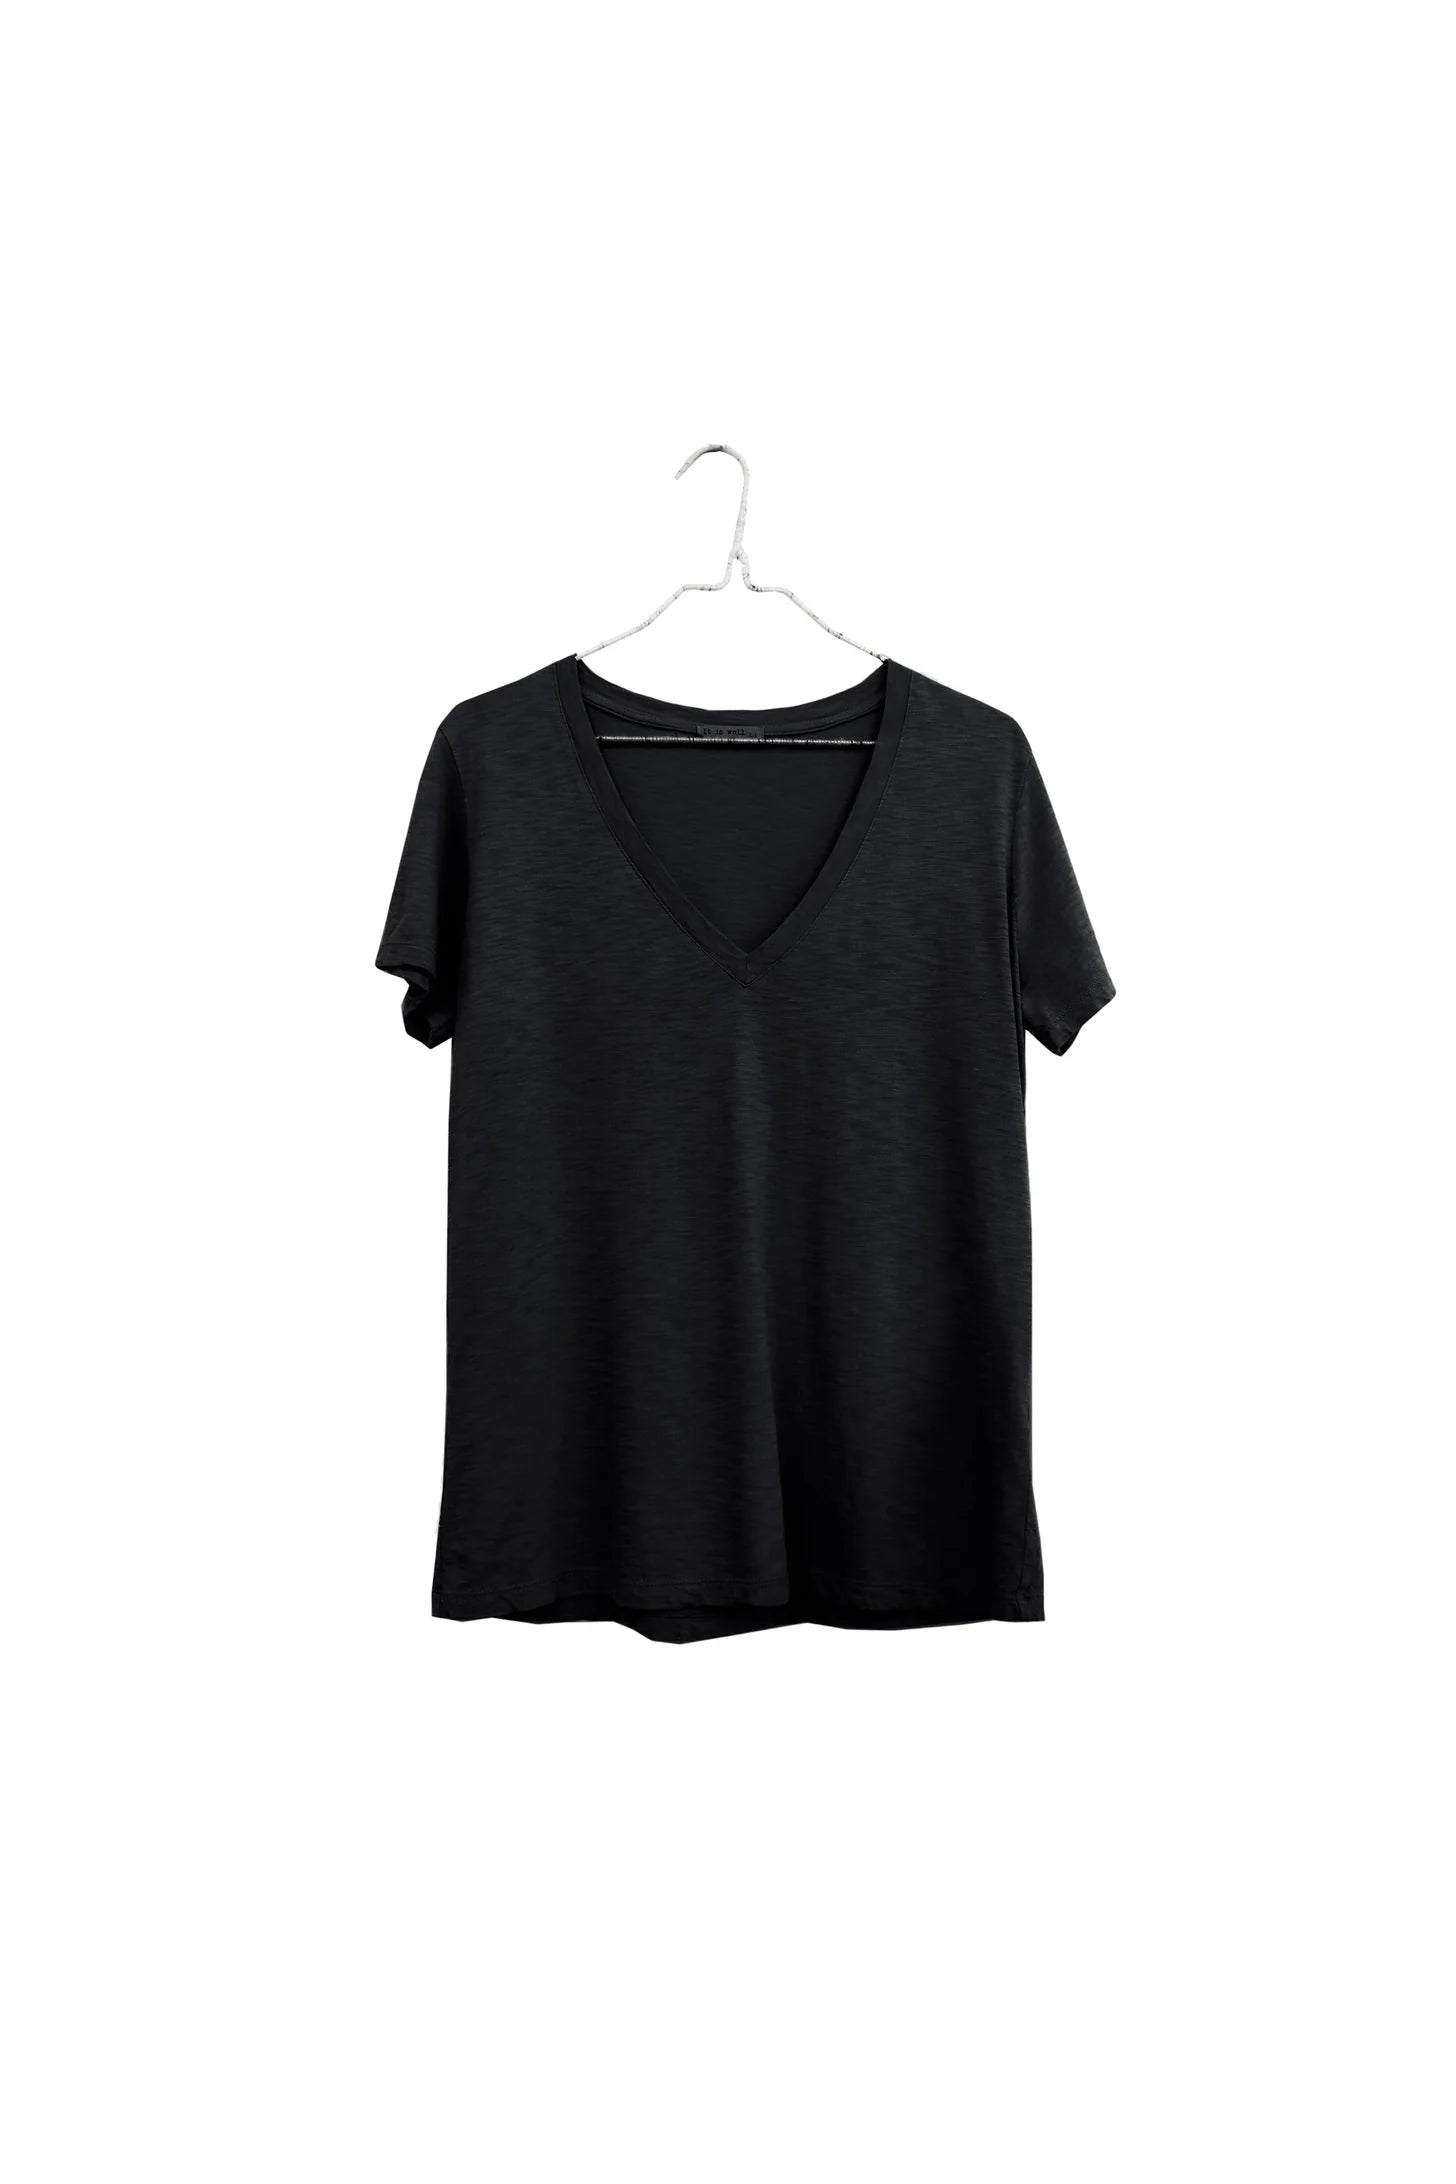 SS24 - It is Well L.A V-Neck T-Shirt in Black